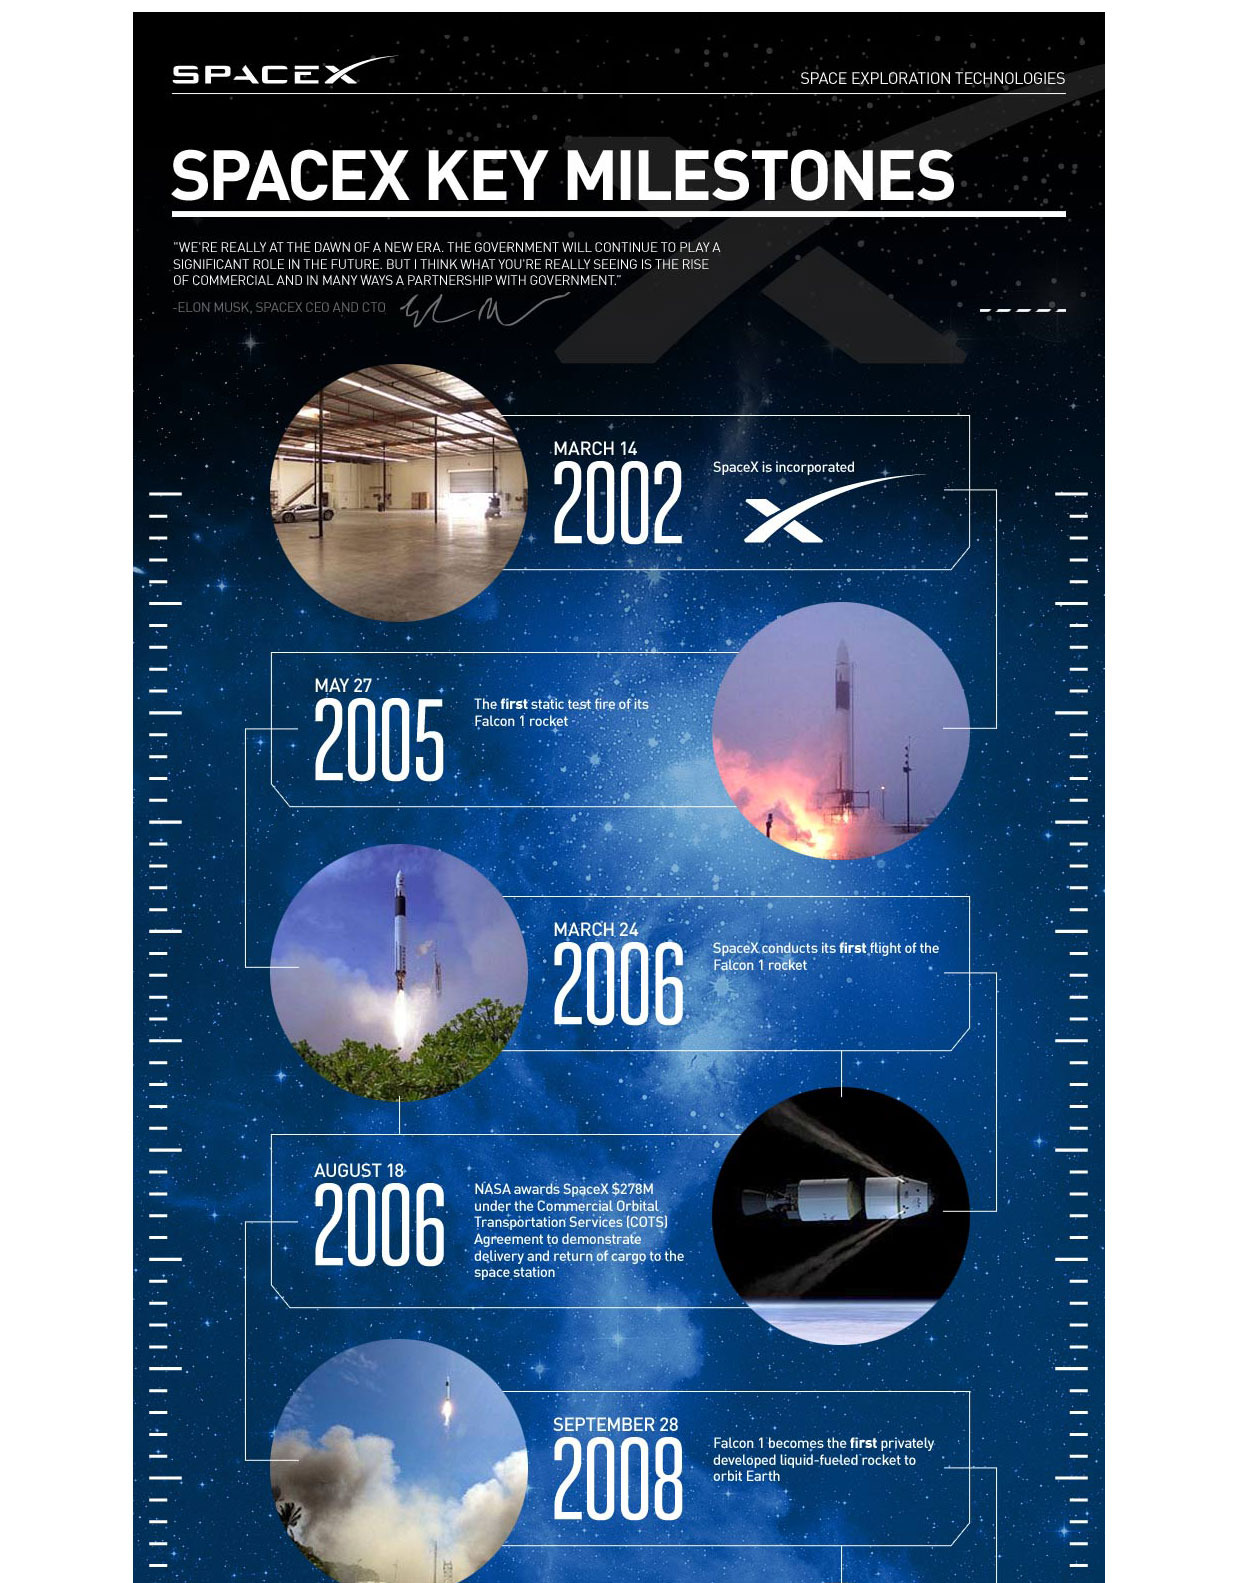 http://payload123.cargocollective.com/1/2/65450/4769850/web_spacex_timeline_1240.jpg